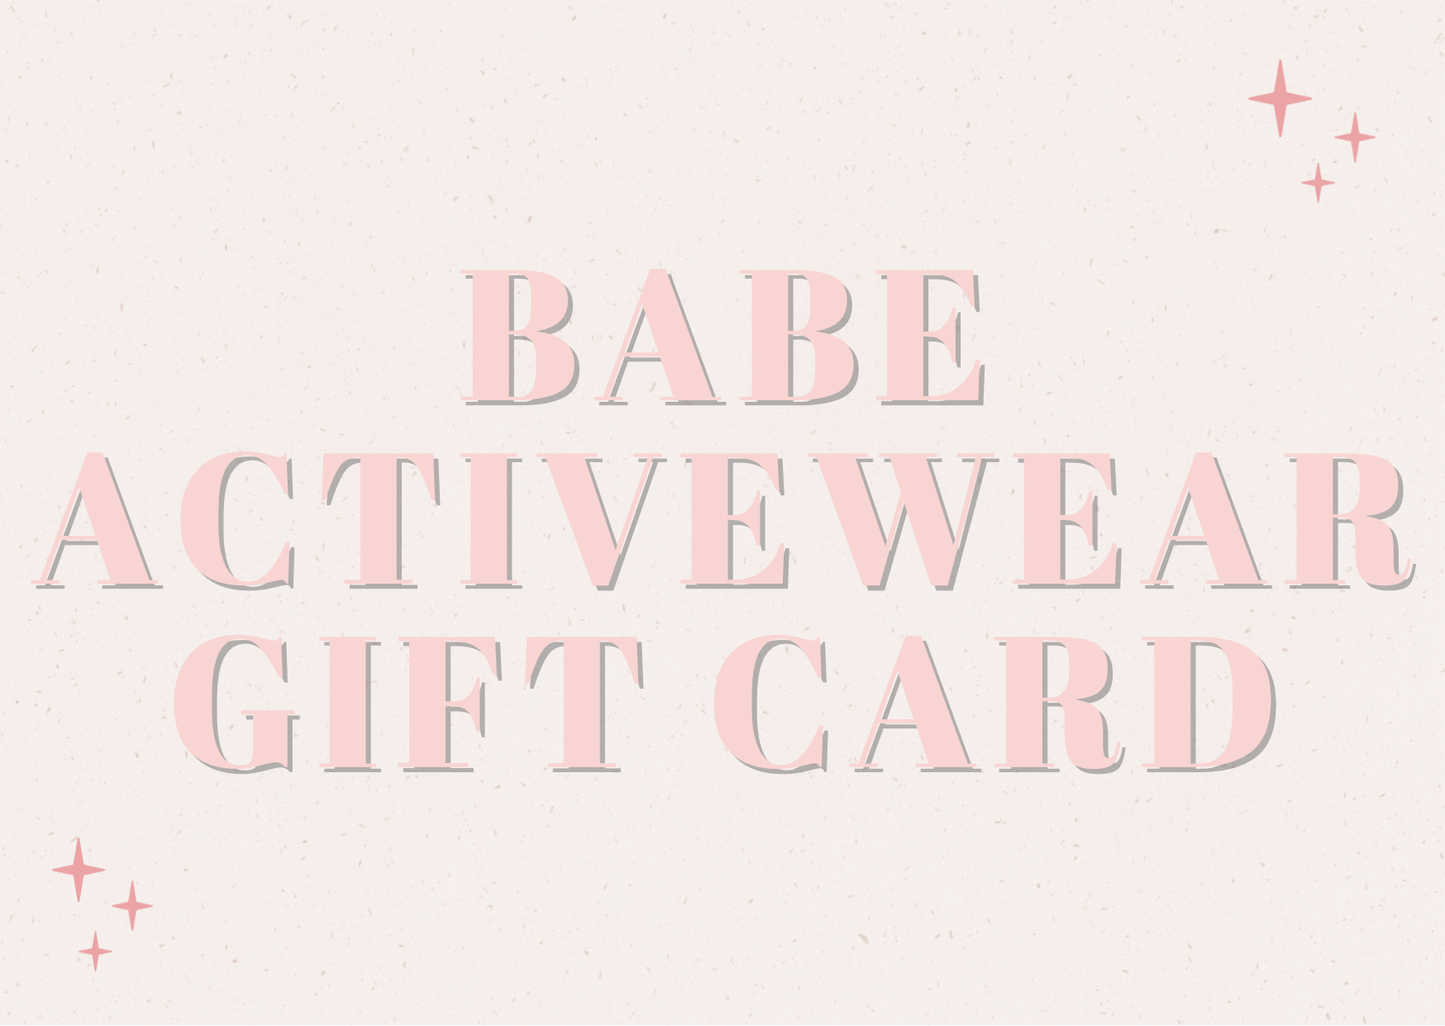 Babe Activewear Gift Card